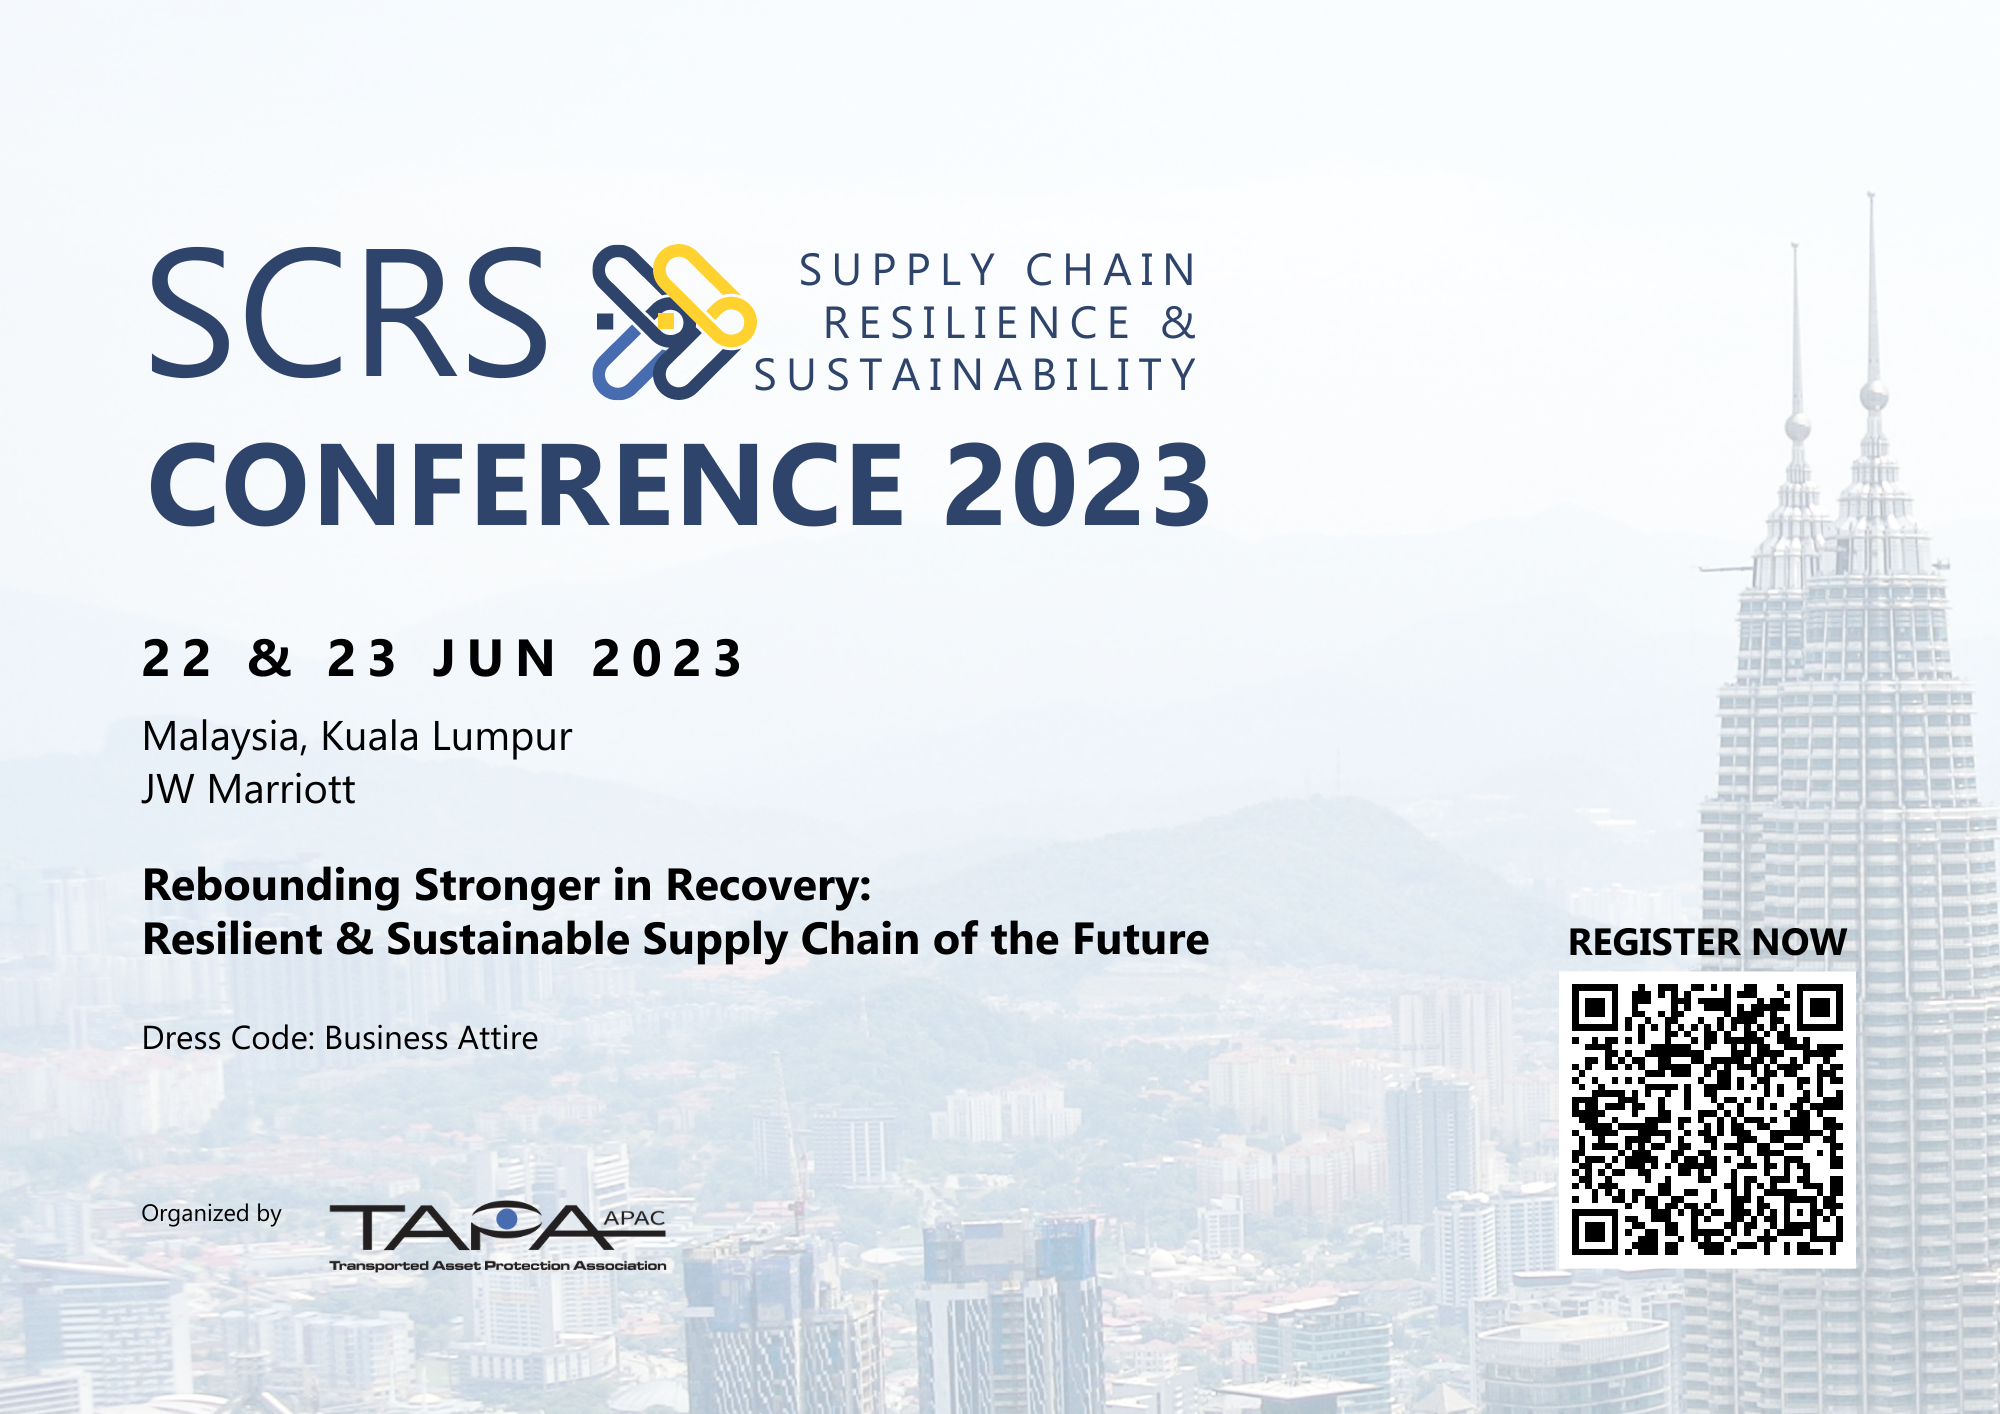 Supply Chain Resilience & Sustainability Conference 2023, Online Event